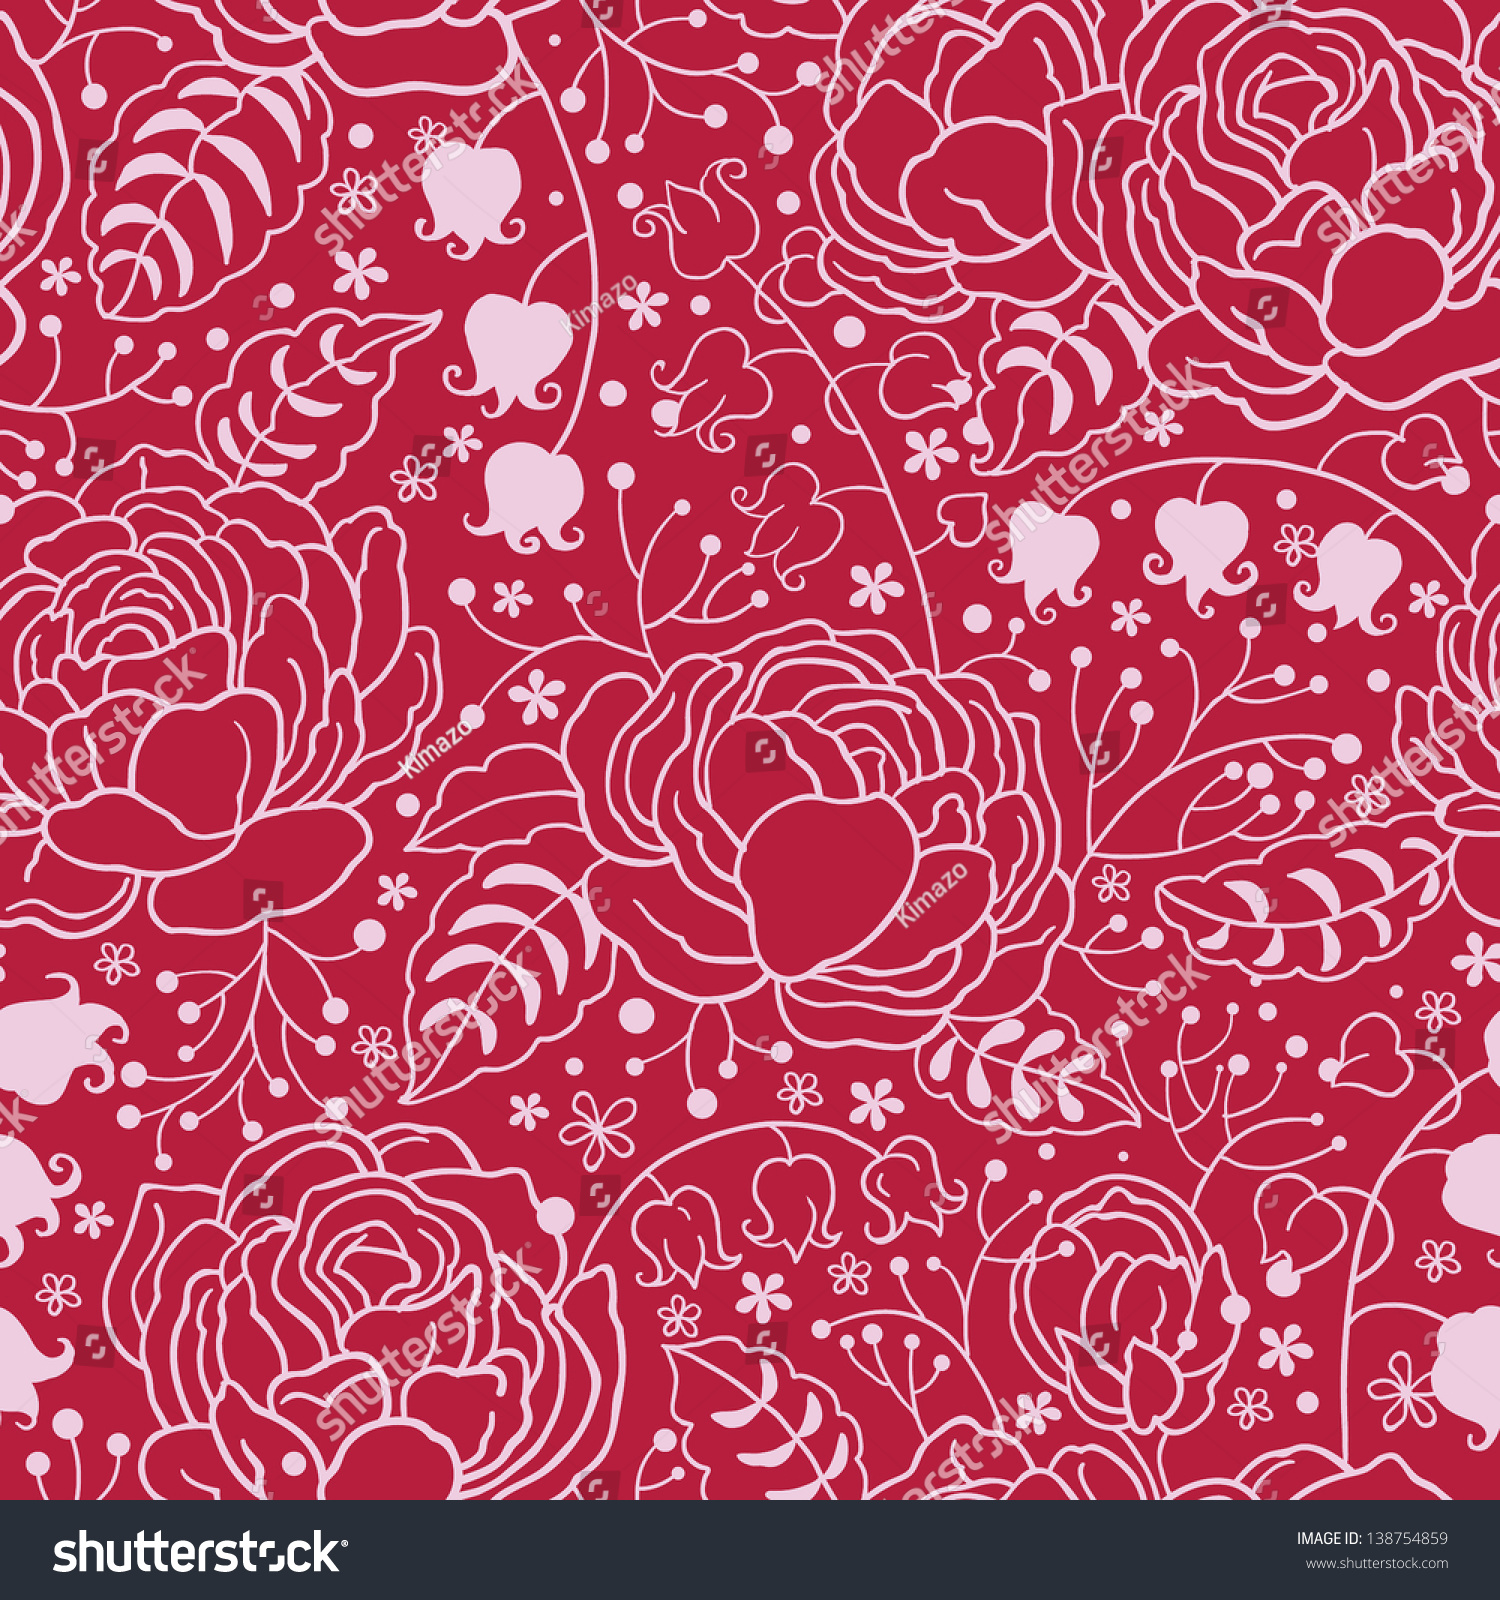 Old English Roses Lace Seamless Pattern. Copy That Square To The Side ...